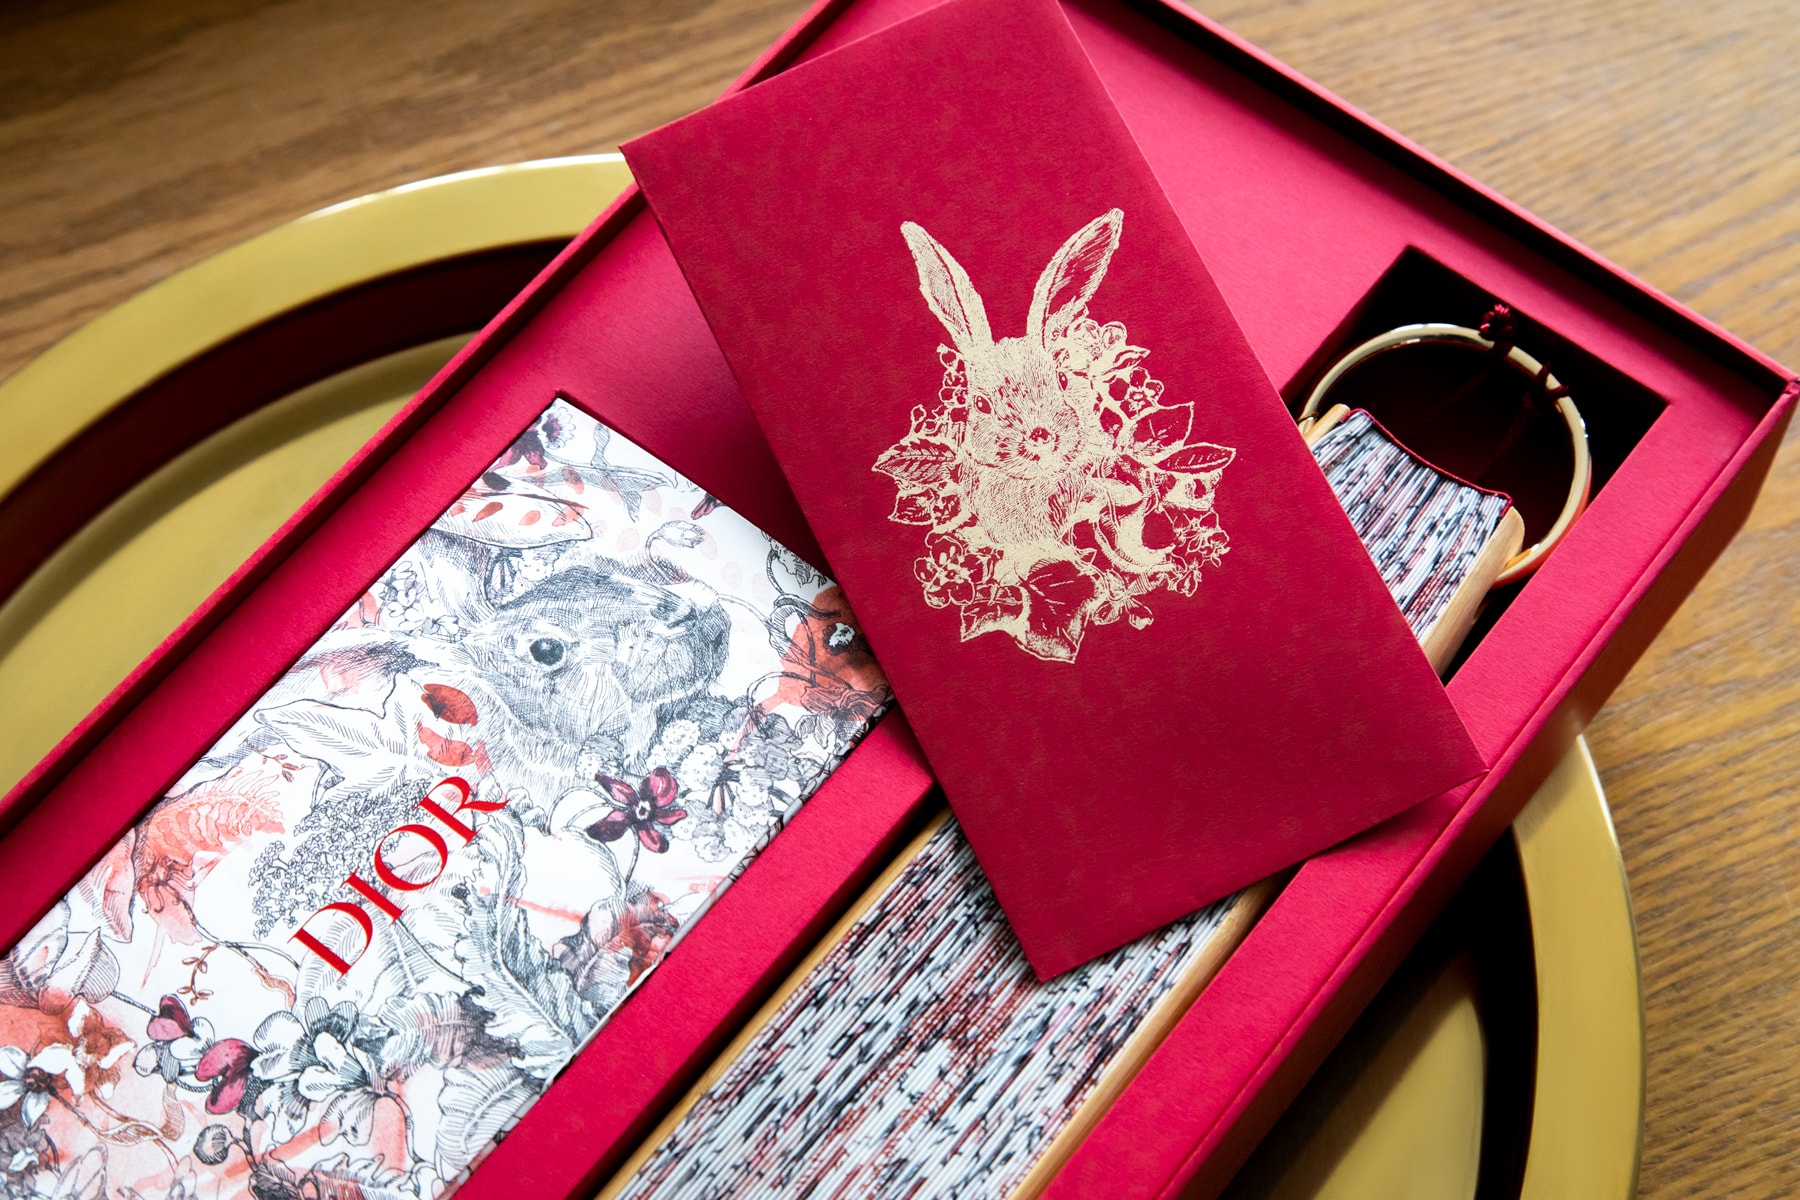 Here Are the Best Red Pockets for Year of the Rabbit Lunar New Year 2023 cny lunar new year chinese new year hong kong Audemars Piguet Valentino Hermes Rimowa Loro Piana Ferragamo Dior Chopard Zegna Nike Pramigiani Fleurier Kenzo Louis Vuitton Nespresso K11 x Bunney.